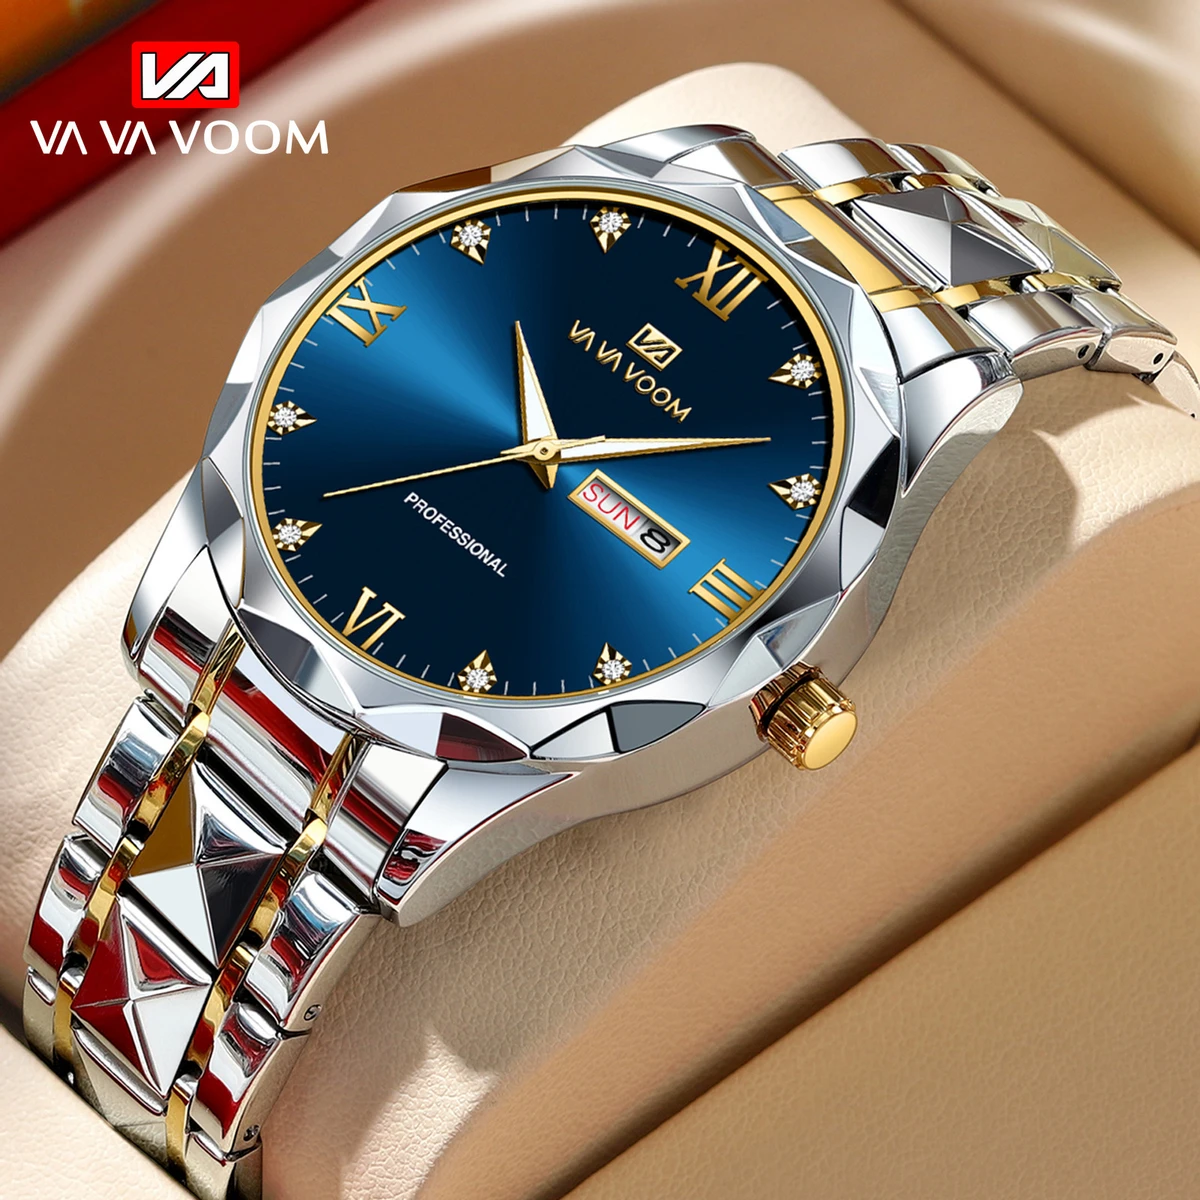 img VAVA VOOM Brand Fashion Mens Watch Luxury Top Business Stainless Steel Water Resistant Wristwatches Male Sport Luminous Date Man Clock